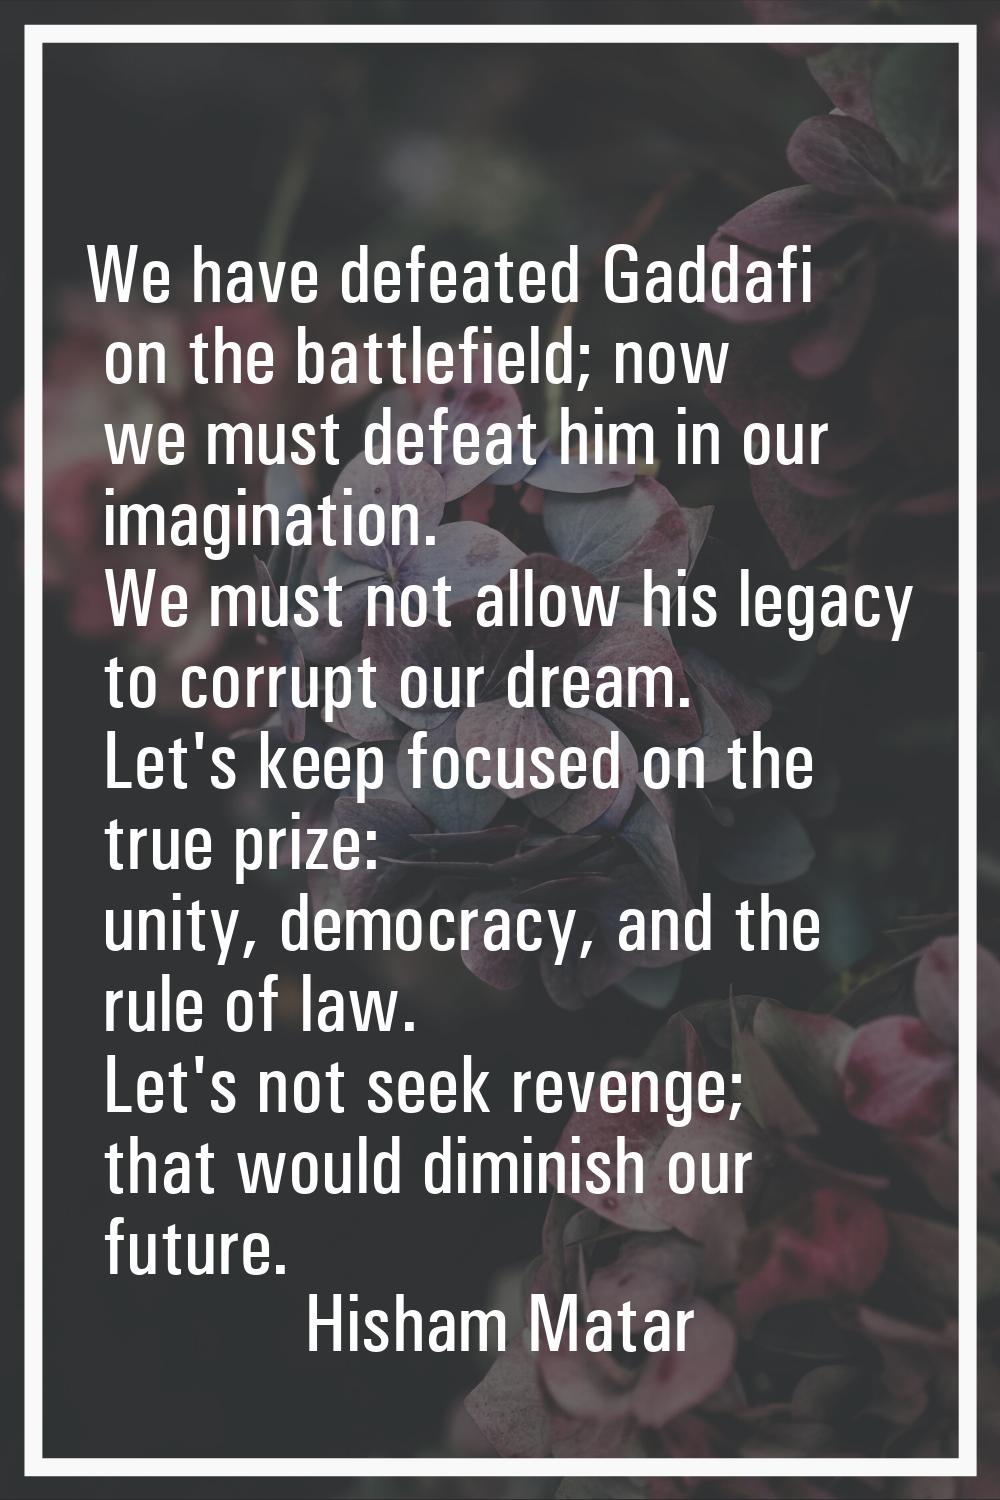 We have defeated Gaddafi on the battlefield; now we must defeat him in our imagination. We must not